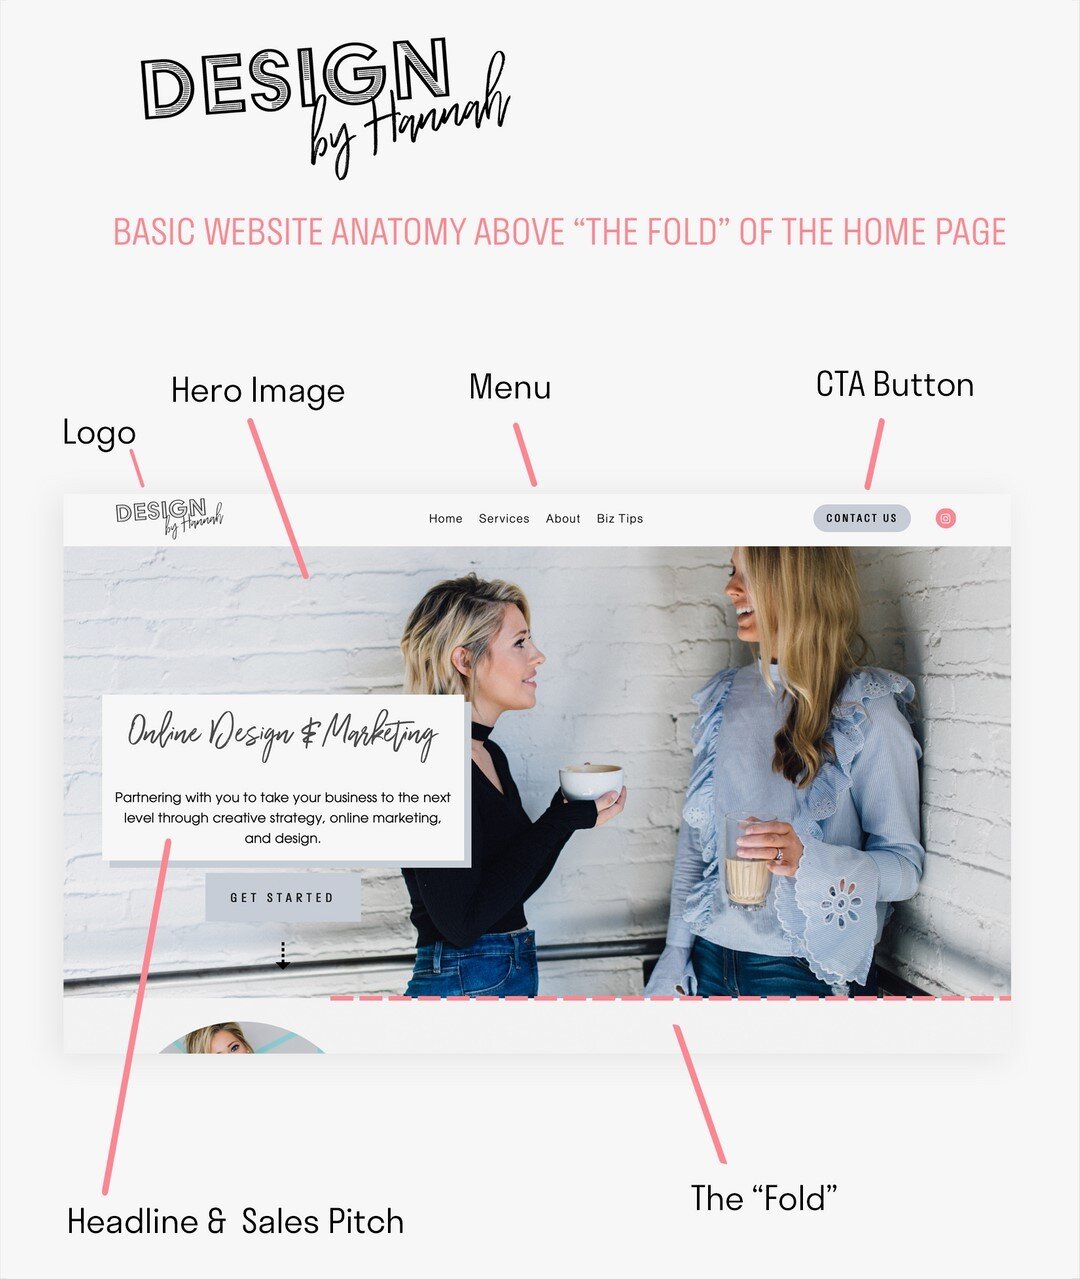 SAVE this post! 🔥🙌🏼 Basic Website Anatomy Above &ldquo;The Fold&rdquo; Of The Home Page:⠀⠀⠀⠀⠀⠀⠀⠀⠀
⠀⠀⠀⠀⠀⠀⠀⠀⠀
Logo: Unique company branding.⠀⠀⠀⠀⠀⠀⠀⠀⠀
⠀⠀⠀⠀⠀⠀⠀⠀⠀
Menu: Site page navigation.⠀⠀⠀⠀⠀⠀⠀⠀⠀
⠀⠀⠀⠀⠀⠀⠀⠀⠀
CTA Button: ' Call To Action' button.⠀⠀⠀⠀⠀